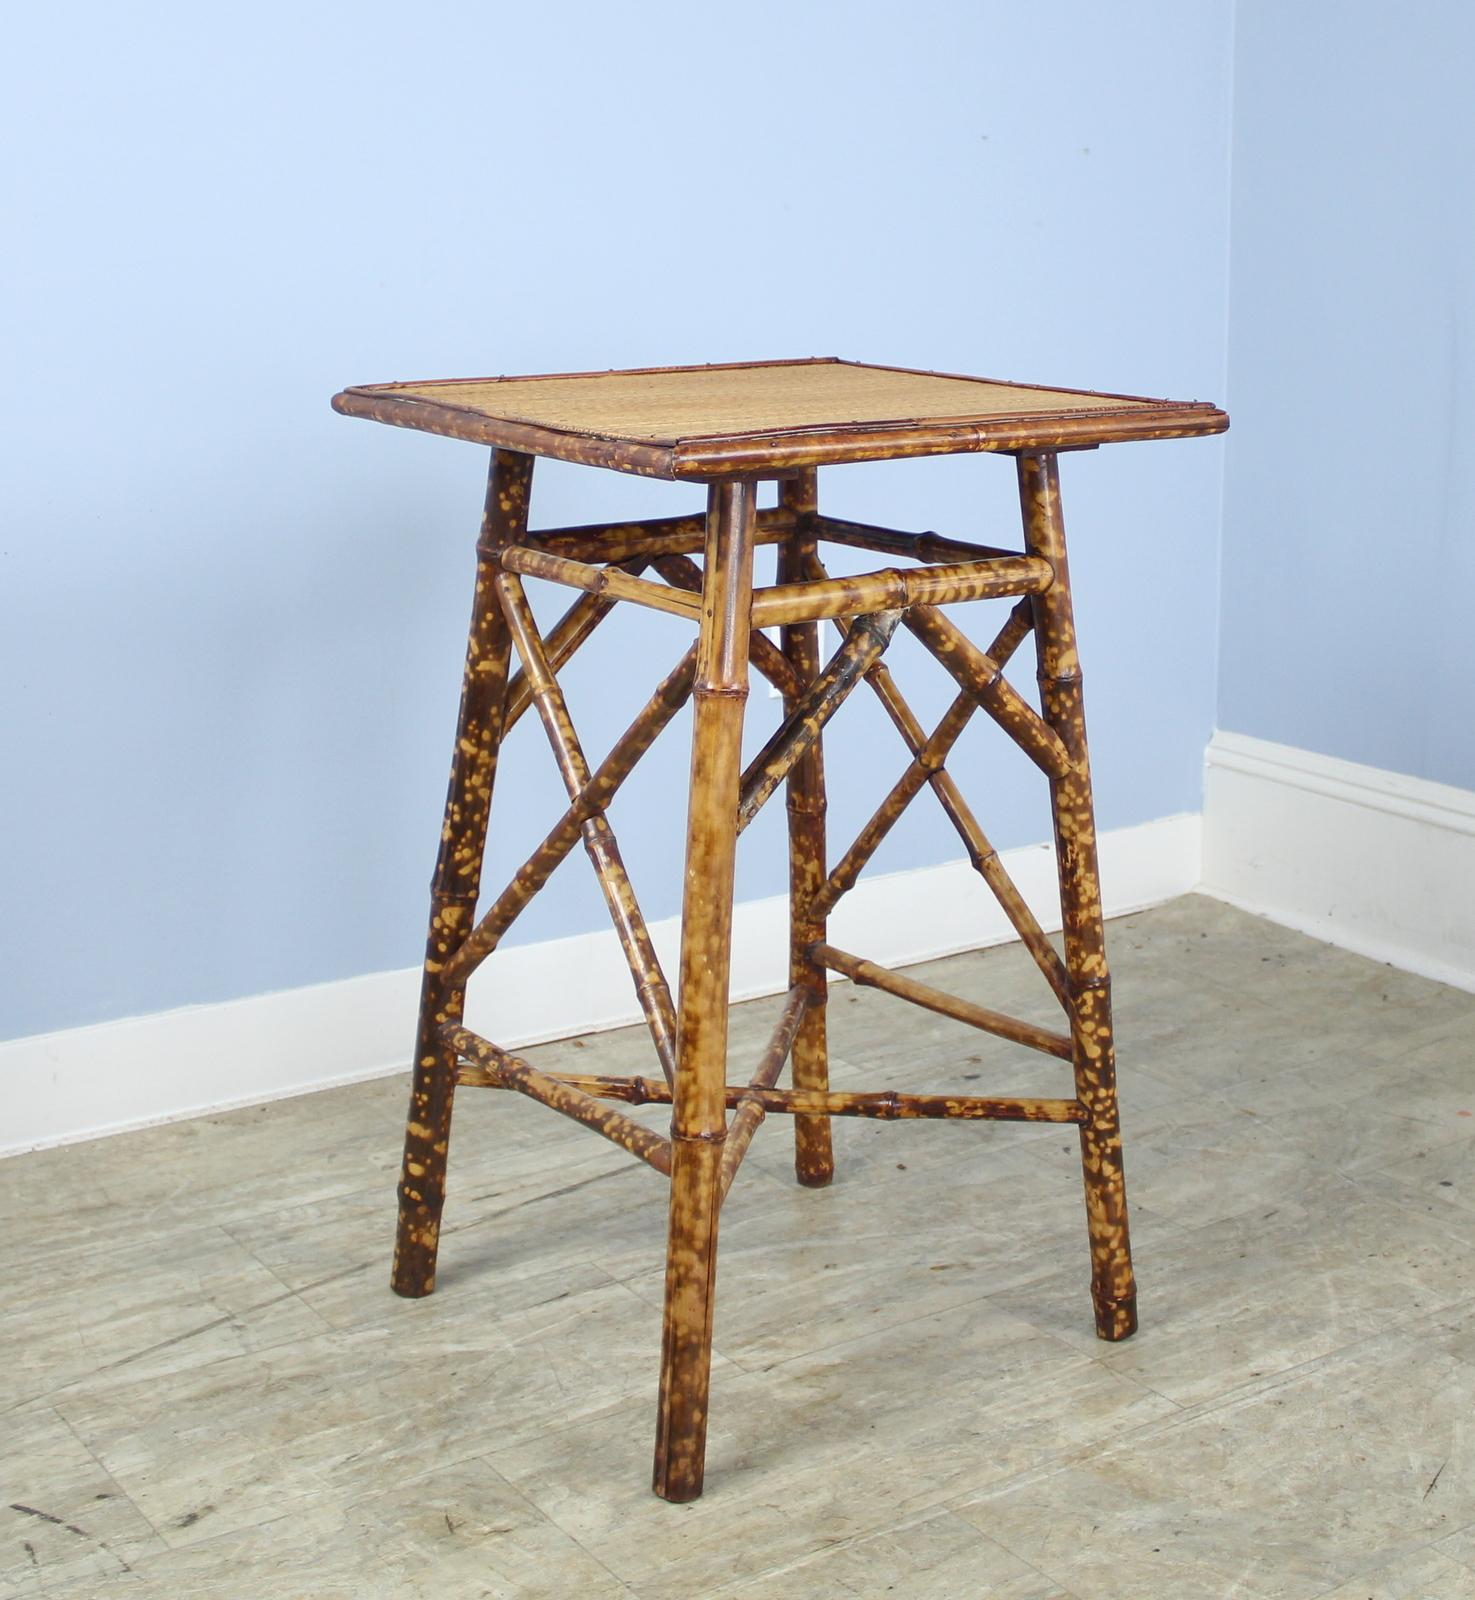 An antique English bamboo side table, with flared legs and with two shelves. Highly decorative decorative details on all sides. Both shelves are made of tightly woven rattan that is in very good condition. The bamboo, vividly painted, is in good